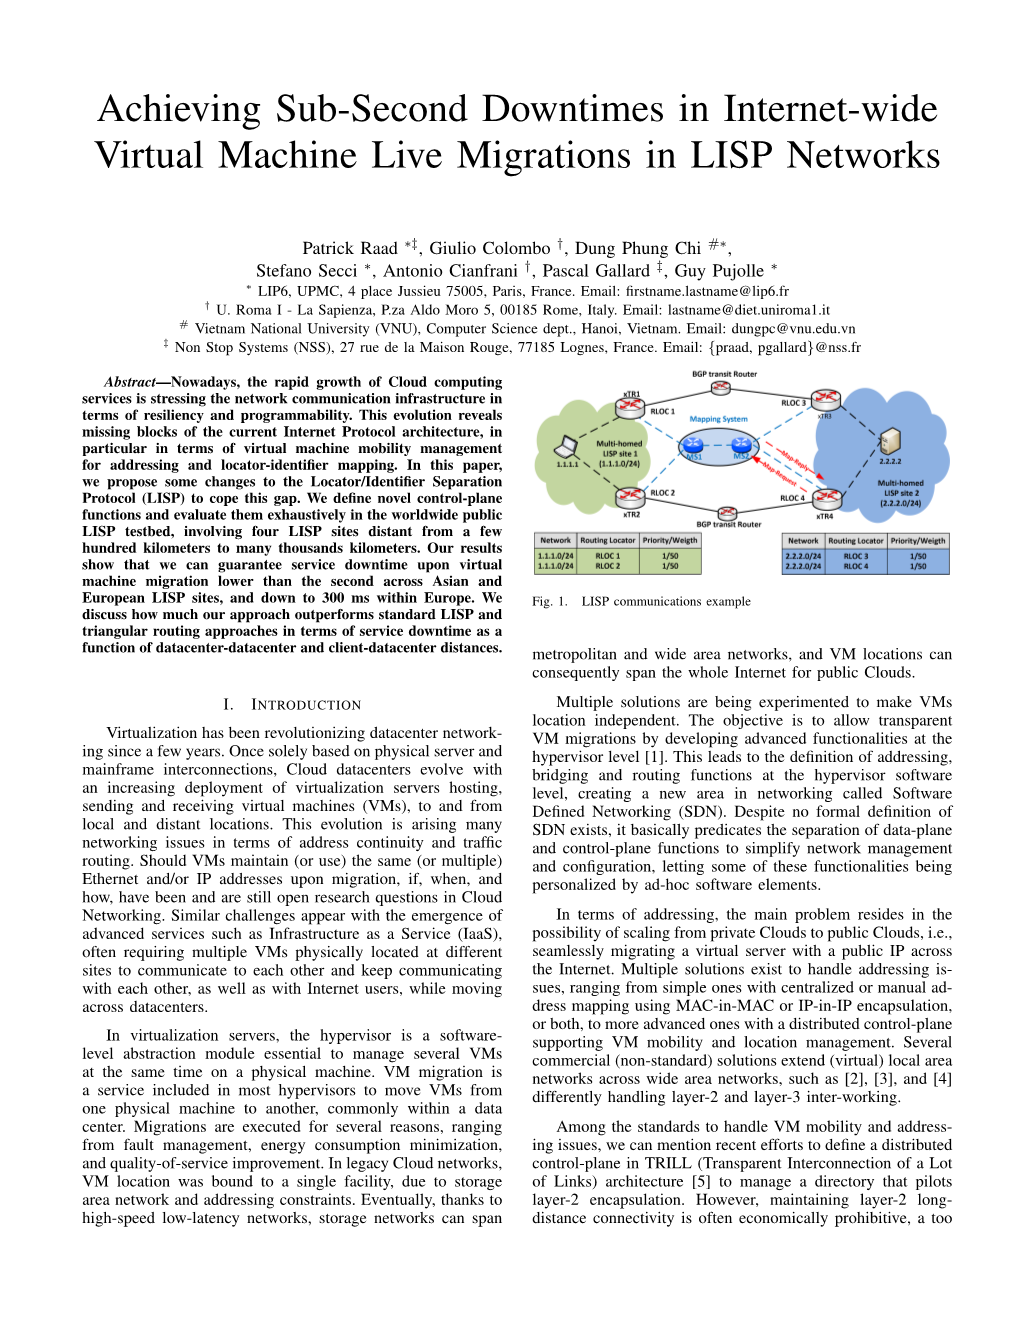 Achieving Sub-Second Downtimes in Internet-Wide Virtual Machine Live Migrations in LISP Networks